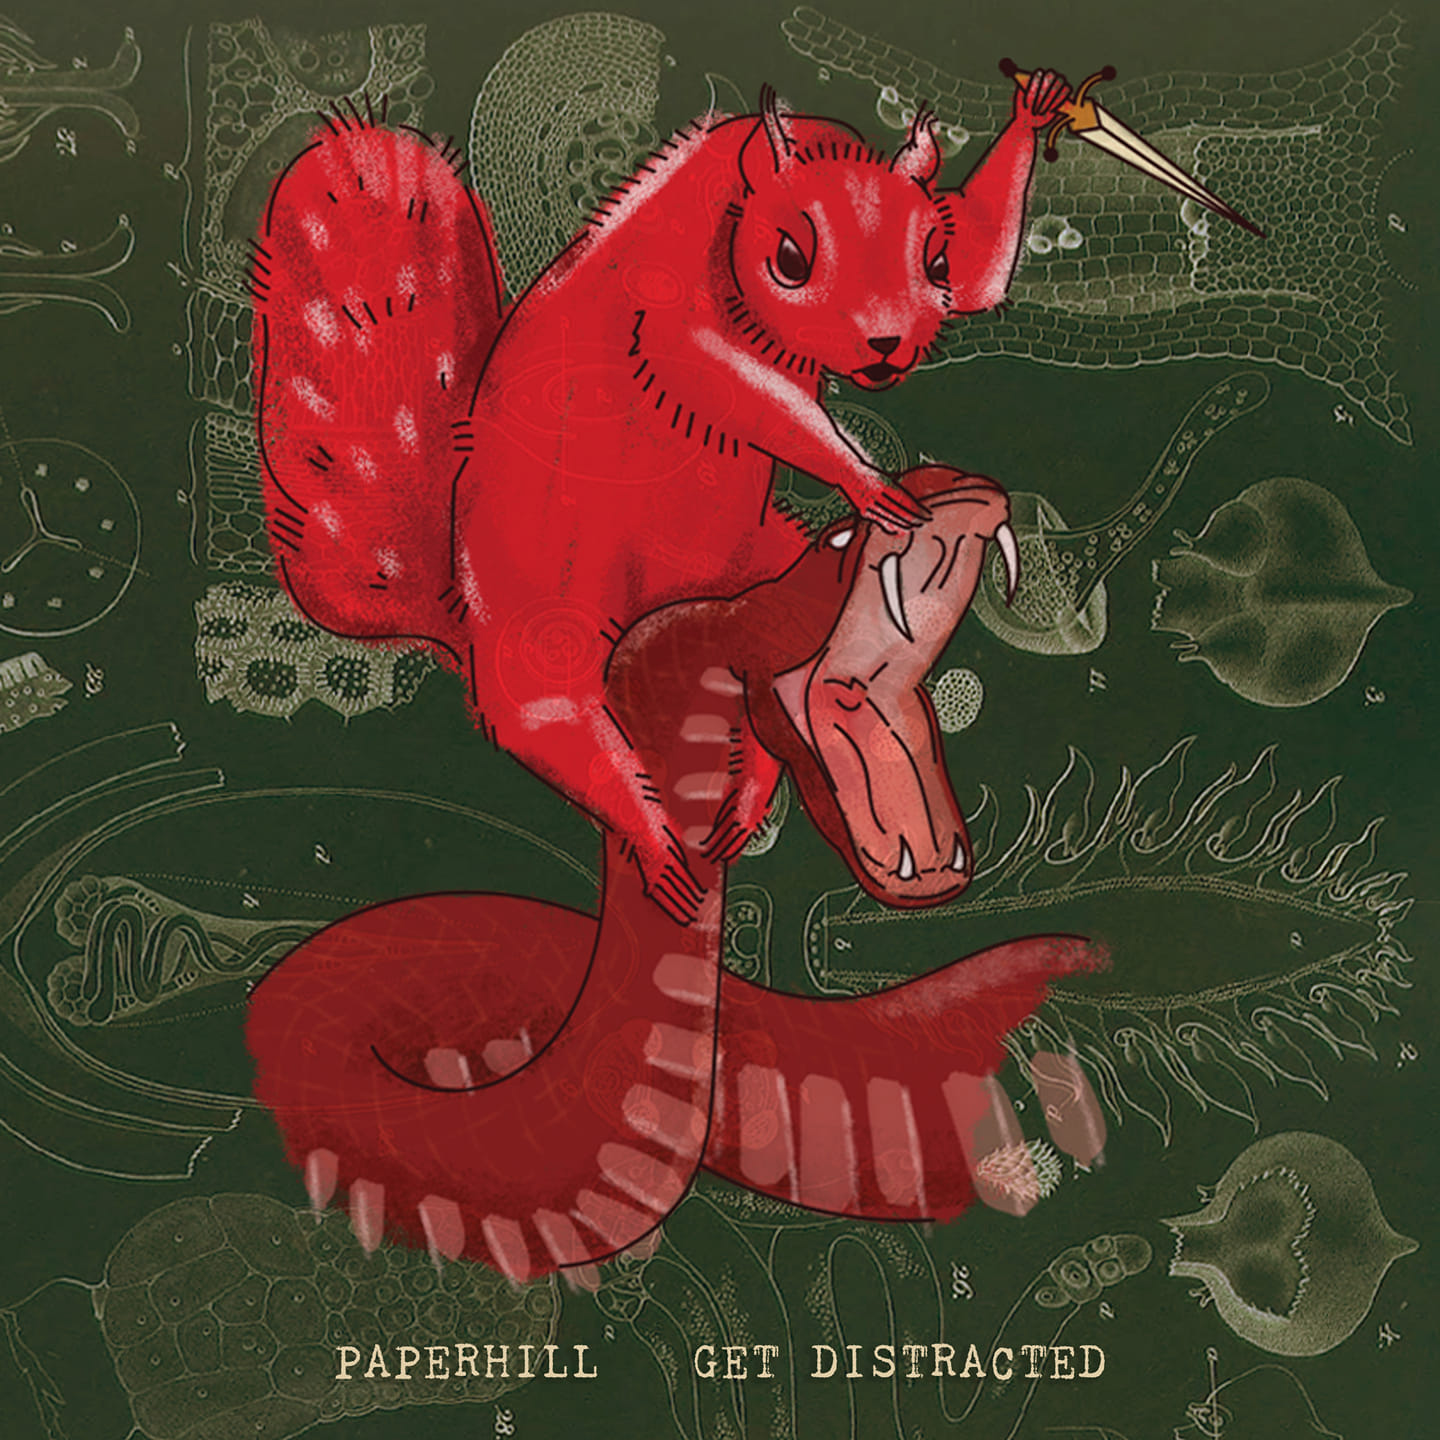 Get Distracted With Paperhill! - blog post image